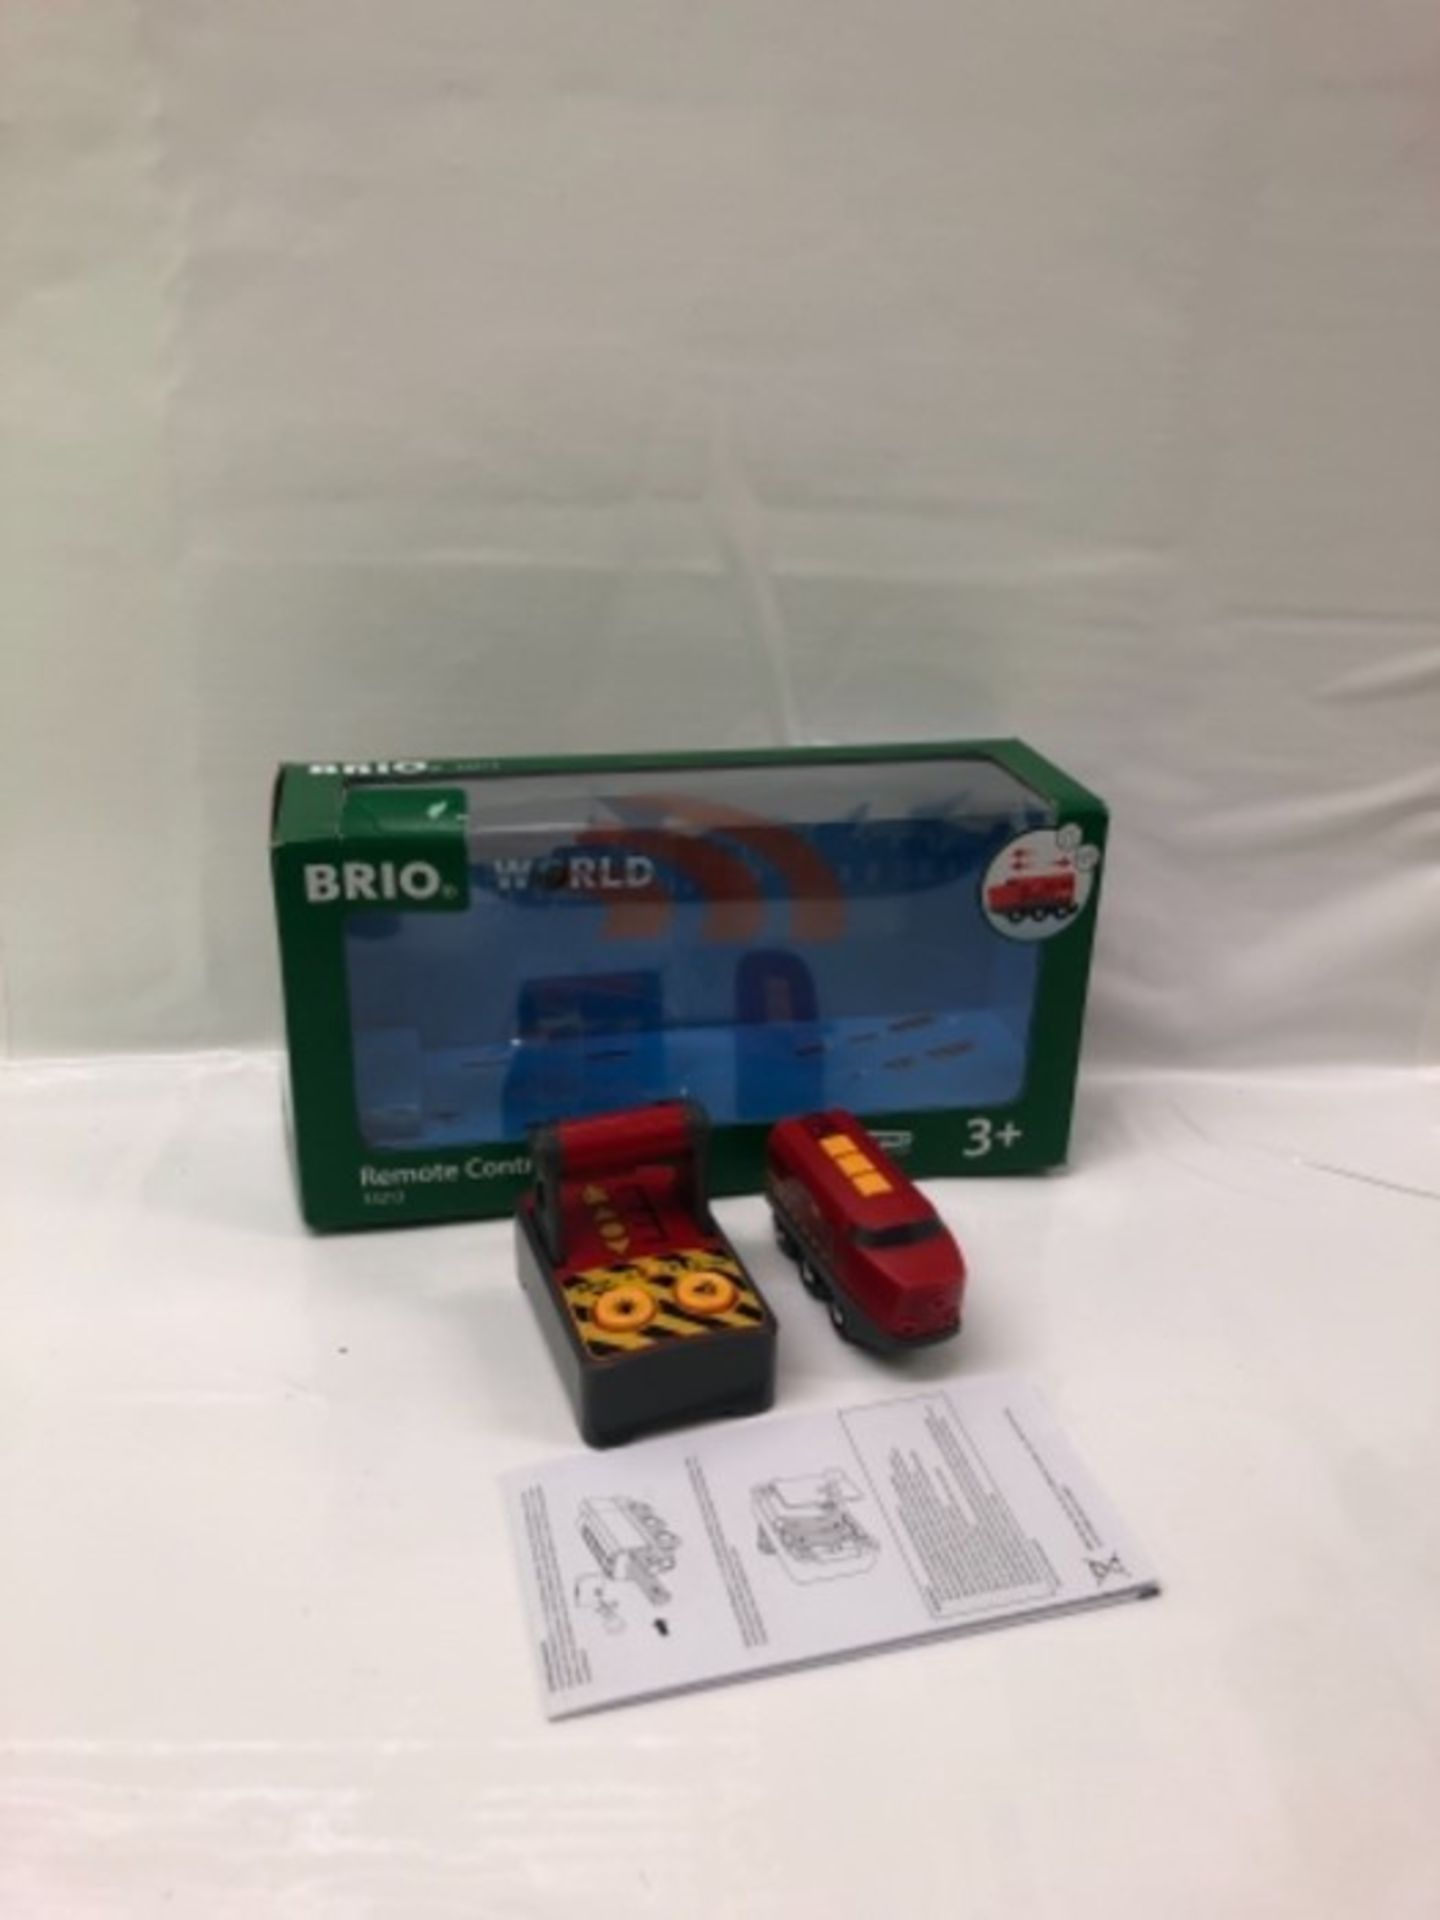 BRIO World Remote Control Engine for Kids Age 3 Years and Up, Compatible with all BRIO - Image 3 of 3